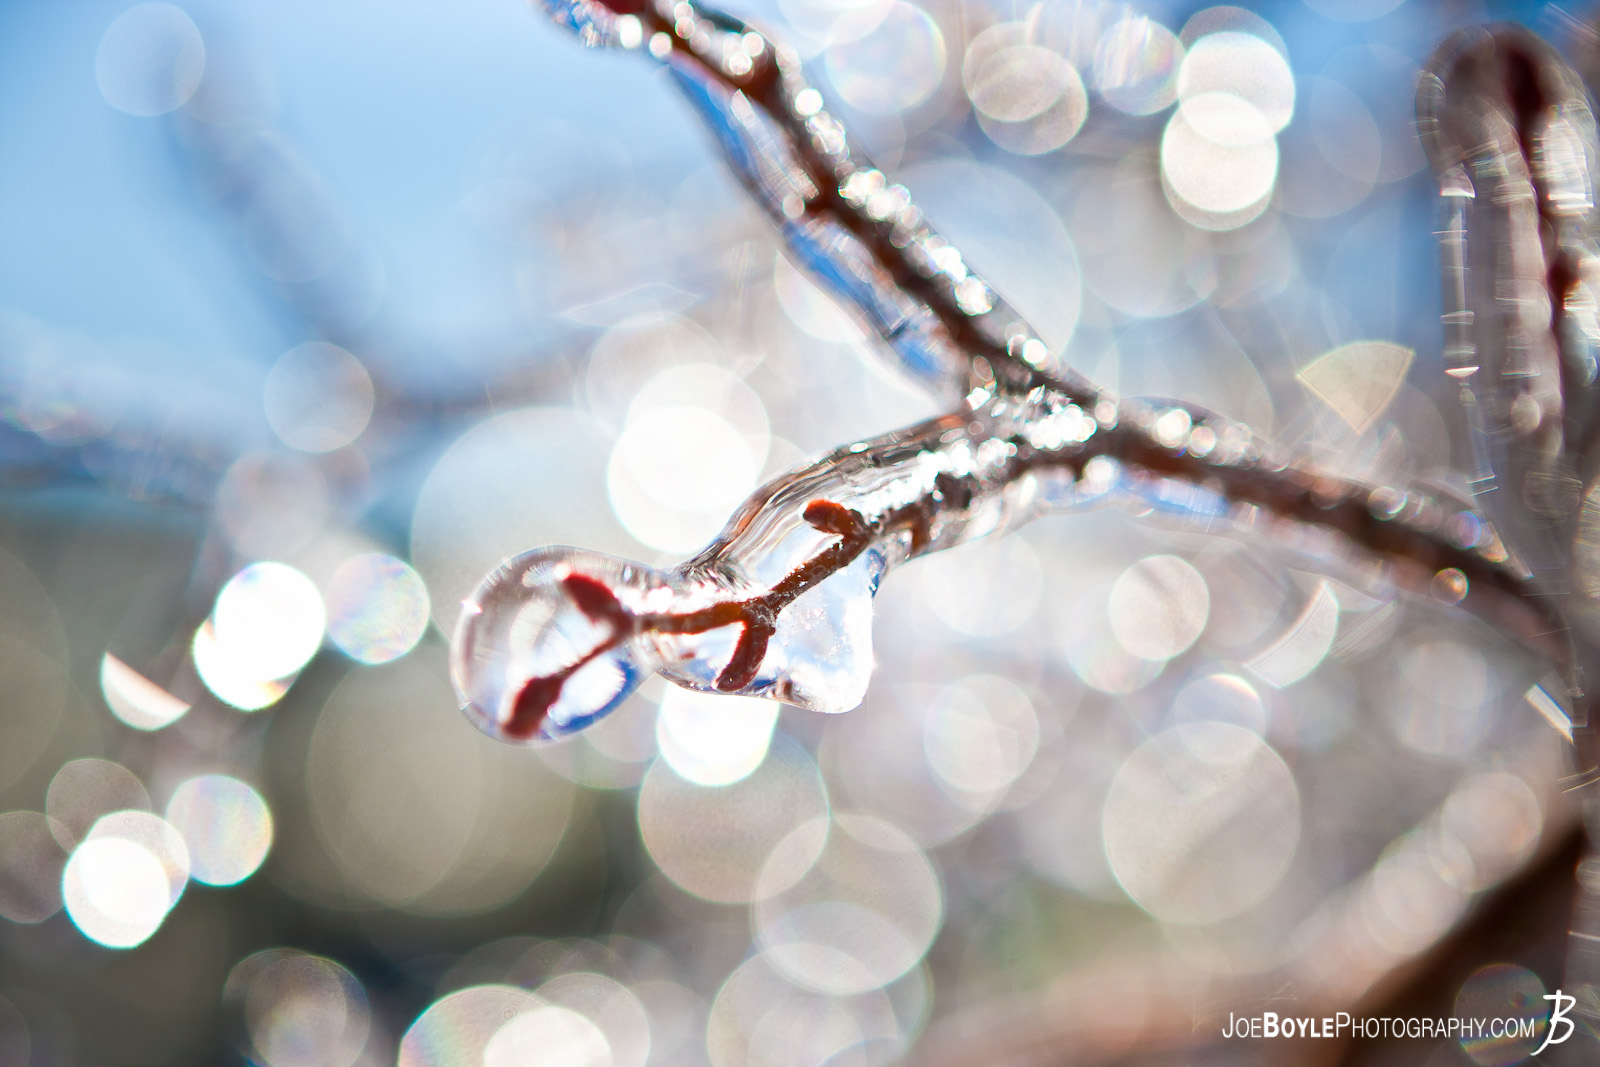  I captured this photo after an ice storm came through the Cleveland area. The storm provided some great picture opportunities that I was able to capture the following day including this tree branch coated in ice! 